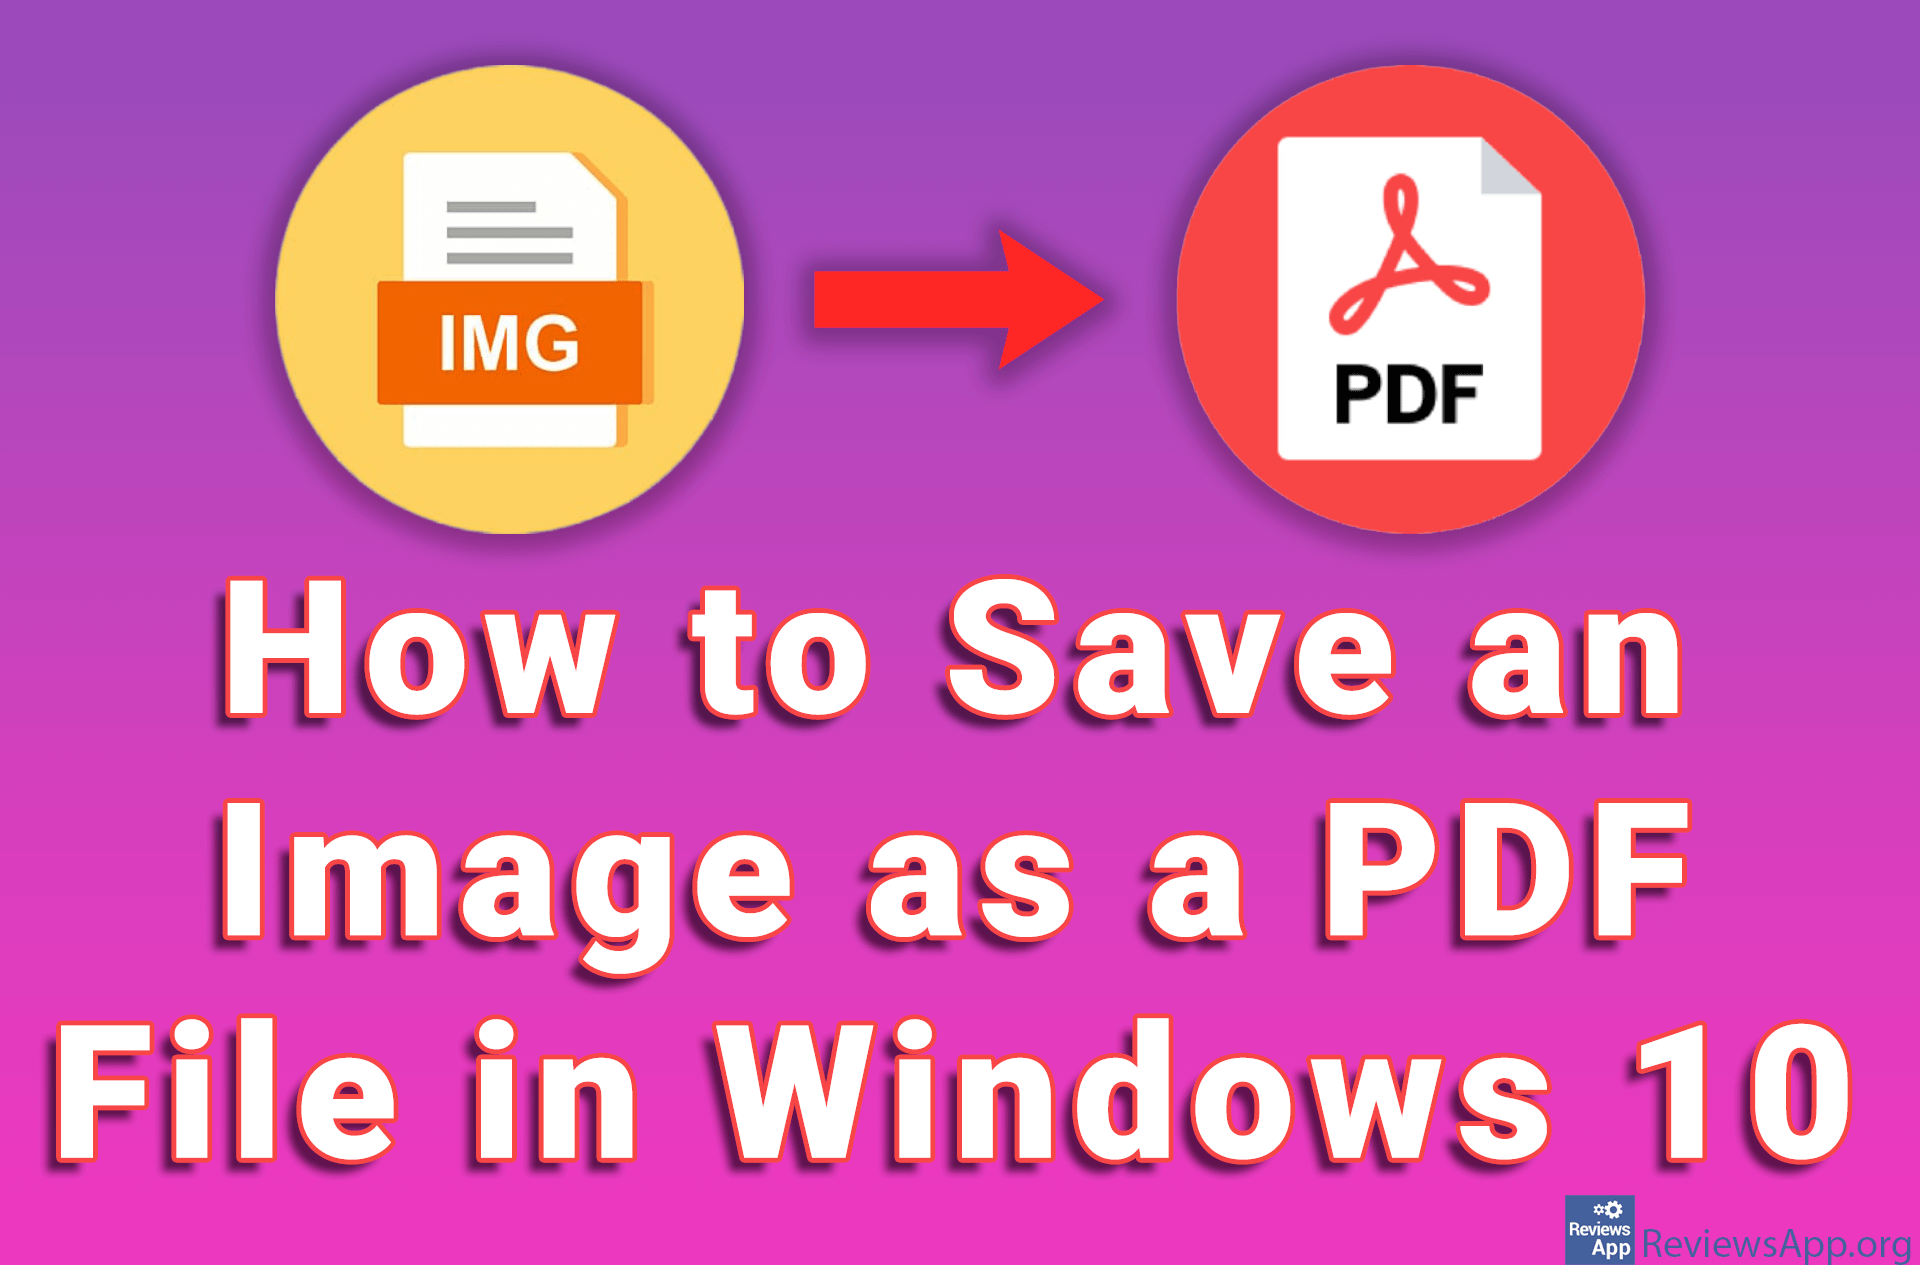 How to Save an Image as a PDF File in Windows 10